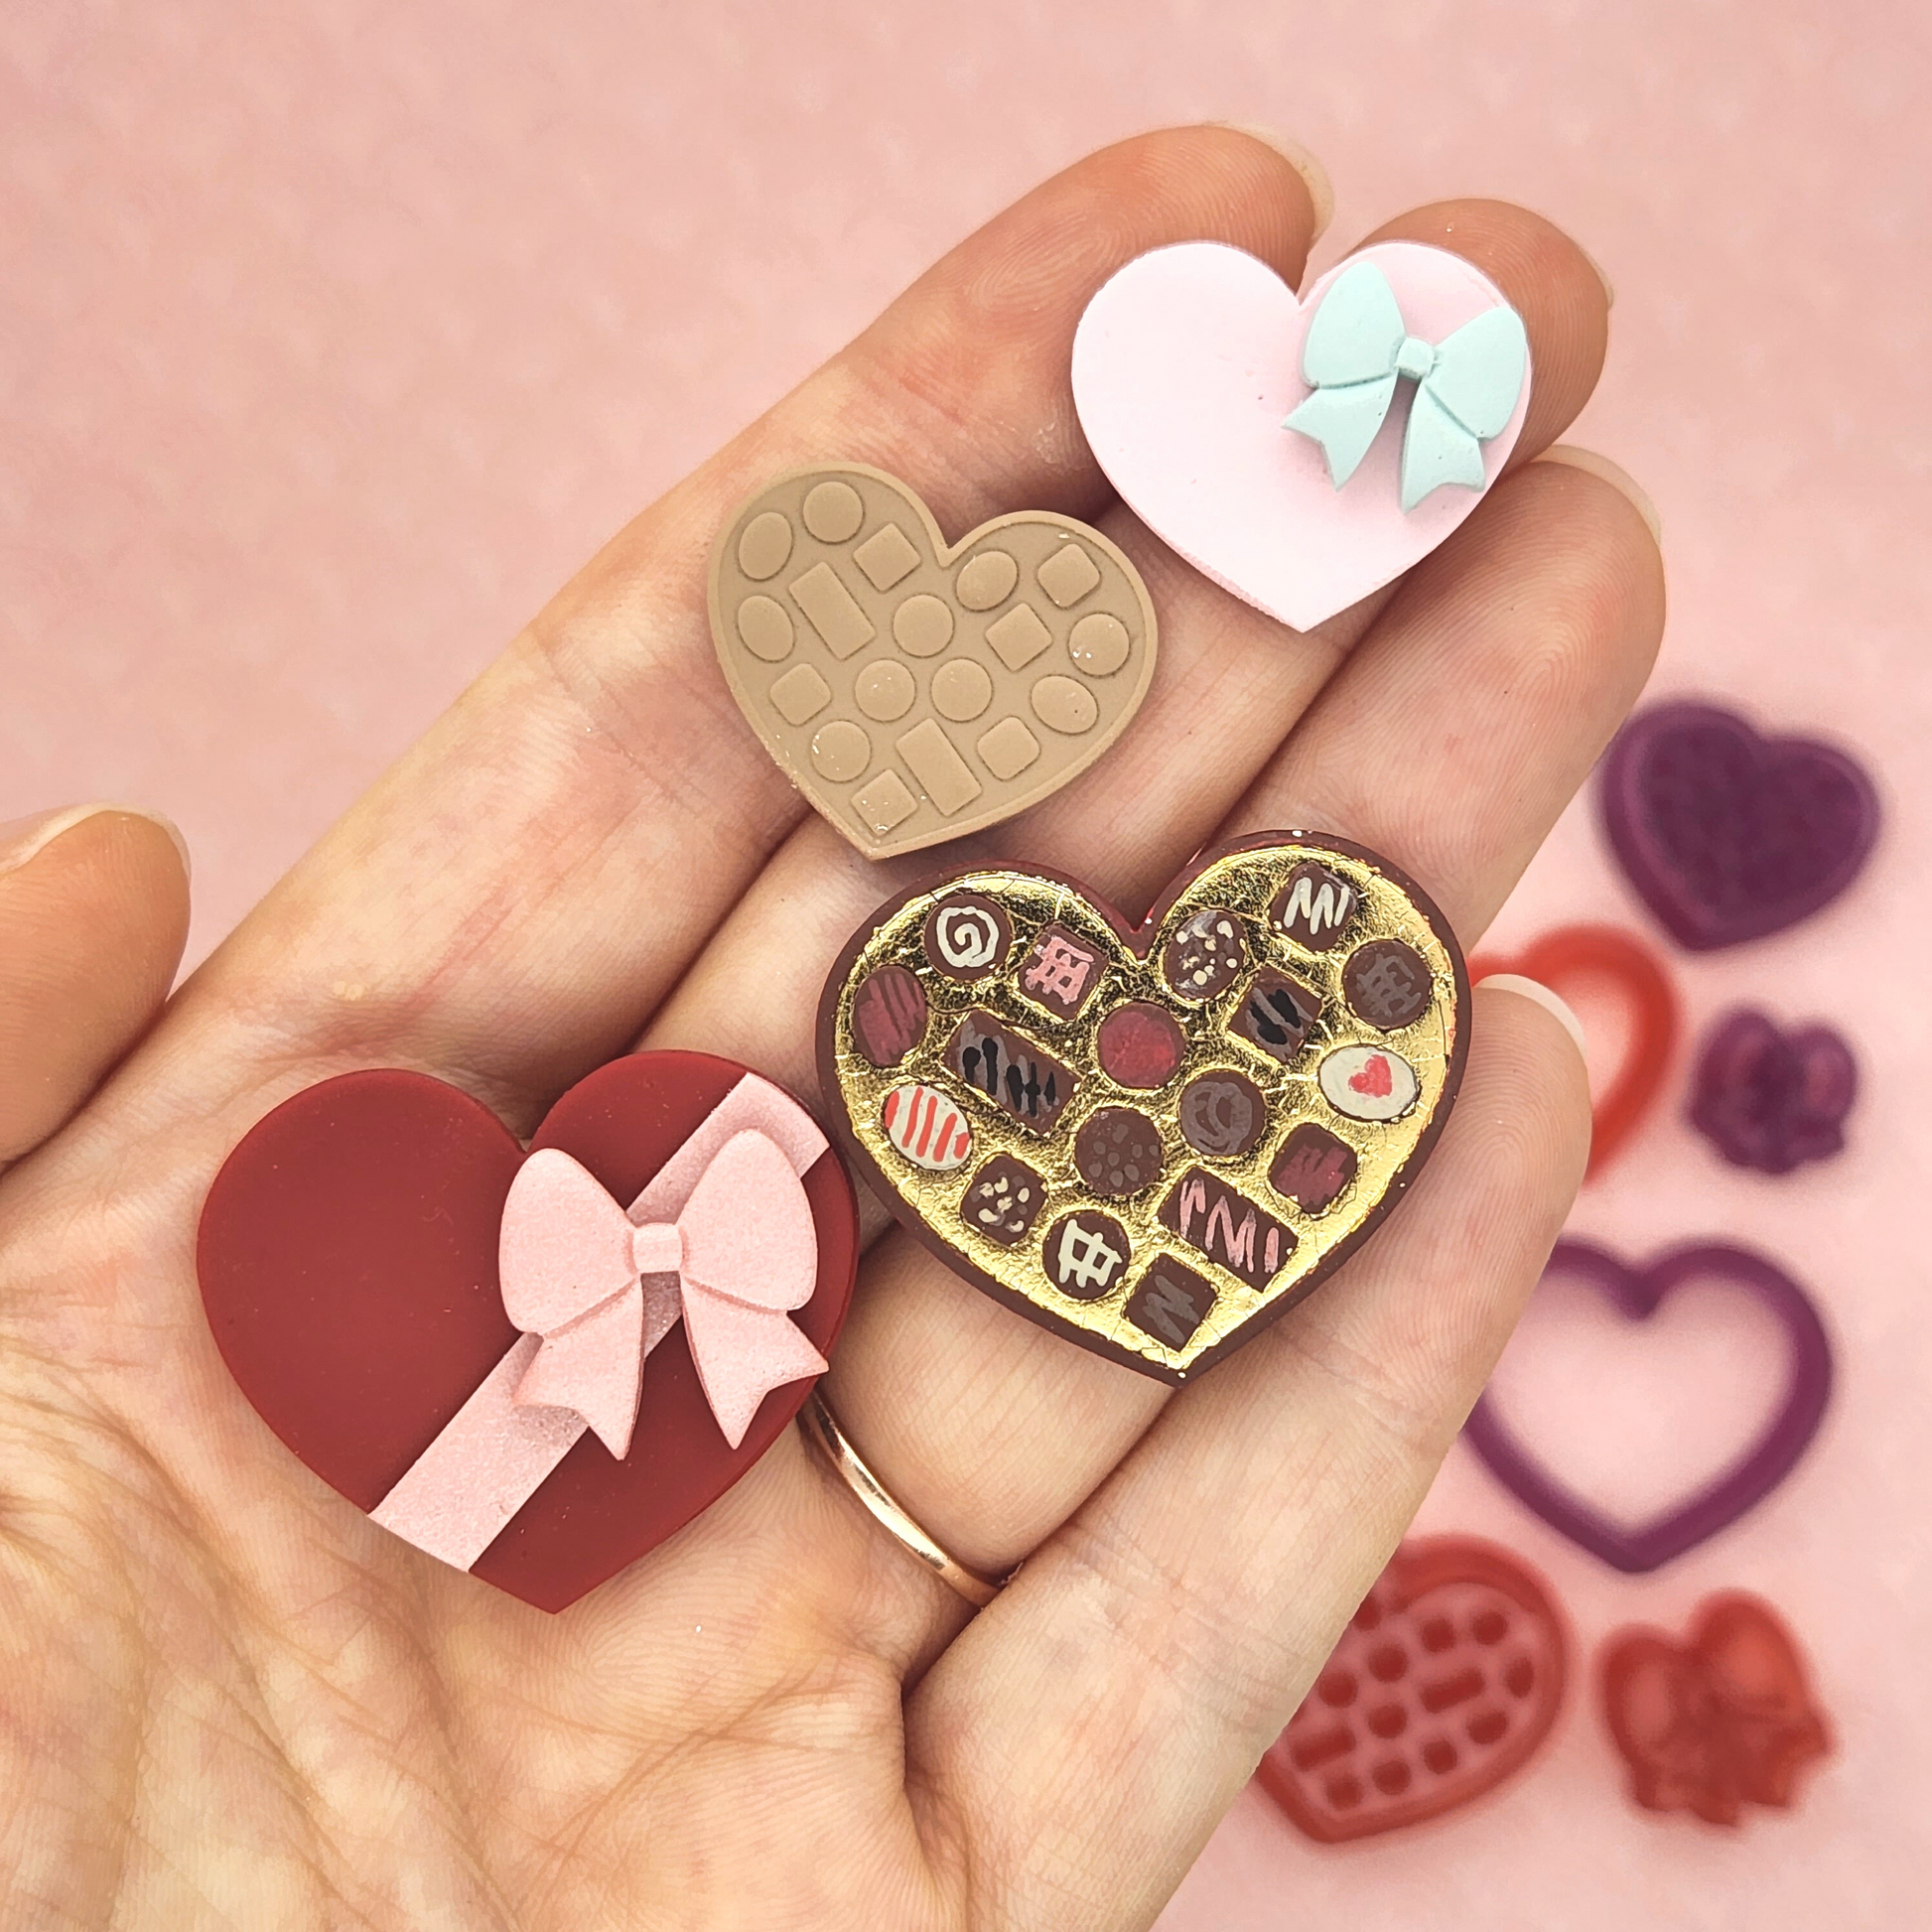 Polymer clay box of chocolates. Heart shaped box with debossed shaped to look like mini chocolates inside the box, and heart shaped lid with bow on top